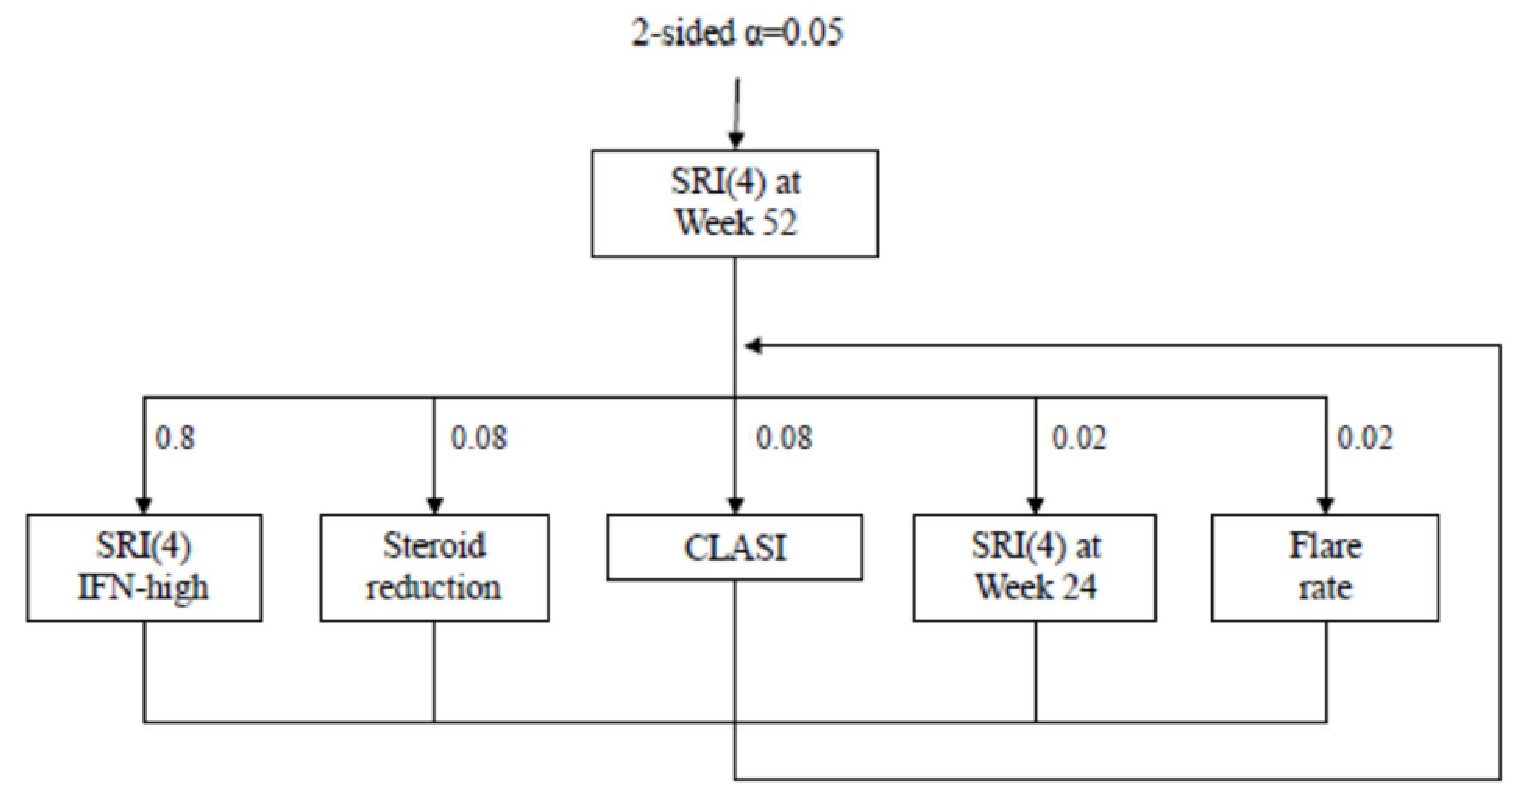 Figure 4 shows the alpha recycling strategy used in TULIP-1. To account for multiplicity to test the primary and five key secondary end points, a testing strategy was followed to control the overall type I error rate in the strong sense. The primary end point, i.e., the difference in proportion of subjects achieving SRI-4 at Week 52 comparing anifrolumab 300 mg to placebo, was tested at an alpha level of 0.05. If the observed p-value was ≤ 0.05, a statistically significant difference in SRI-4 between the treatment groups at Week 52 was concluded, and the alpha of 0.05 was preserved for testing of the key secondary end points. If the observed p-value is > 0.05, no statistically significant difference between treatment groups was declared, and no formal testing of the key secondary end points was carried out. The five key secondary end points (SRI-4in the IFN test-high subgroup, steroid reduction, CLASI reduction, SRI-4 at Week 24, and flare rate) were tested at alpha levels of 0.04, 0.004, 0.004, 0.001, and 0.001, respectively. If 1 or more of the hypotheses were rejected at these levels, the corresponding alpha was distributed to the end points not rejected according to the assigned weights.